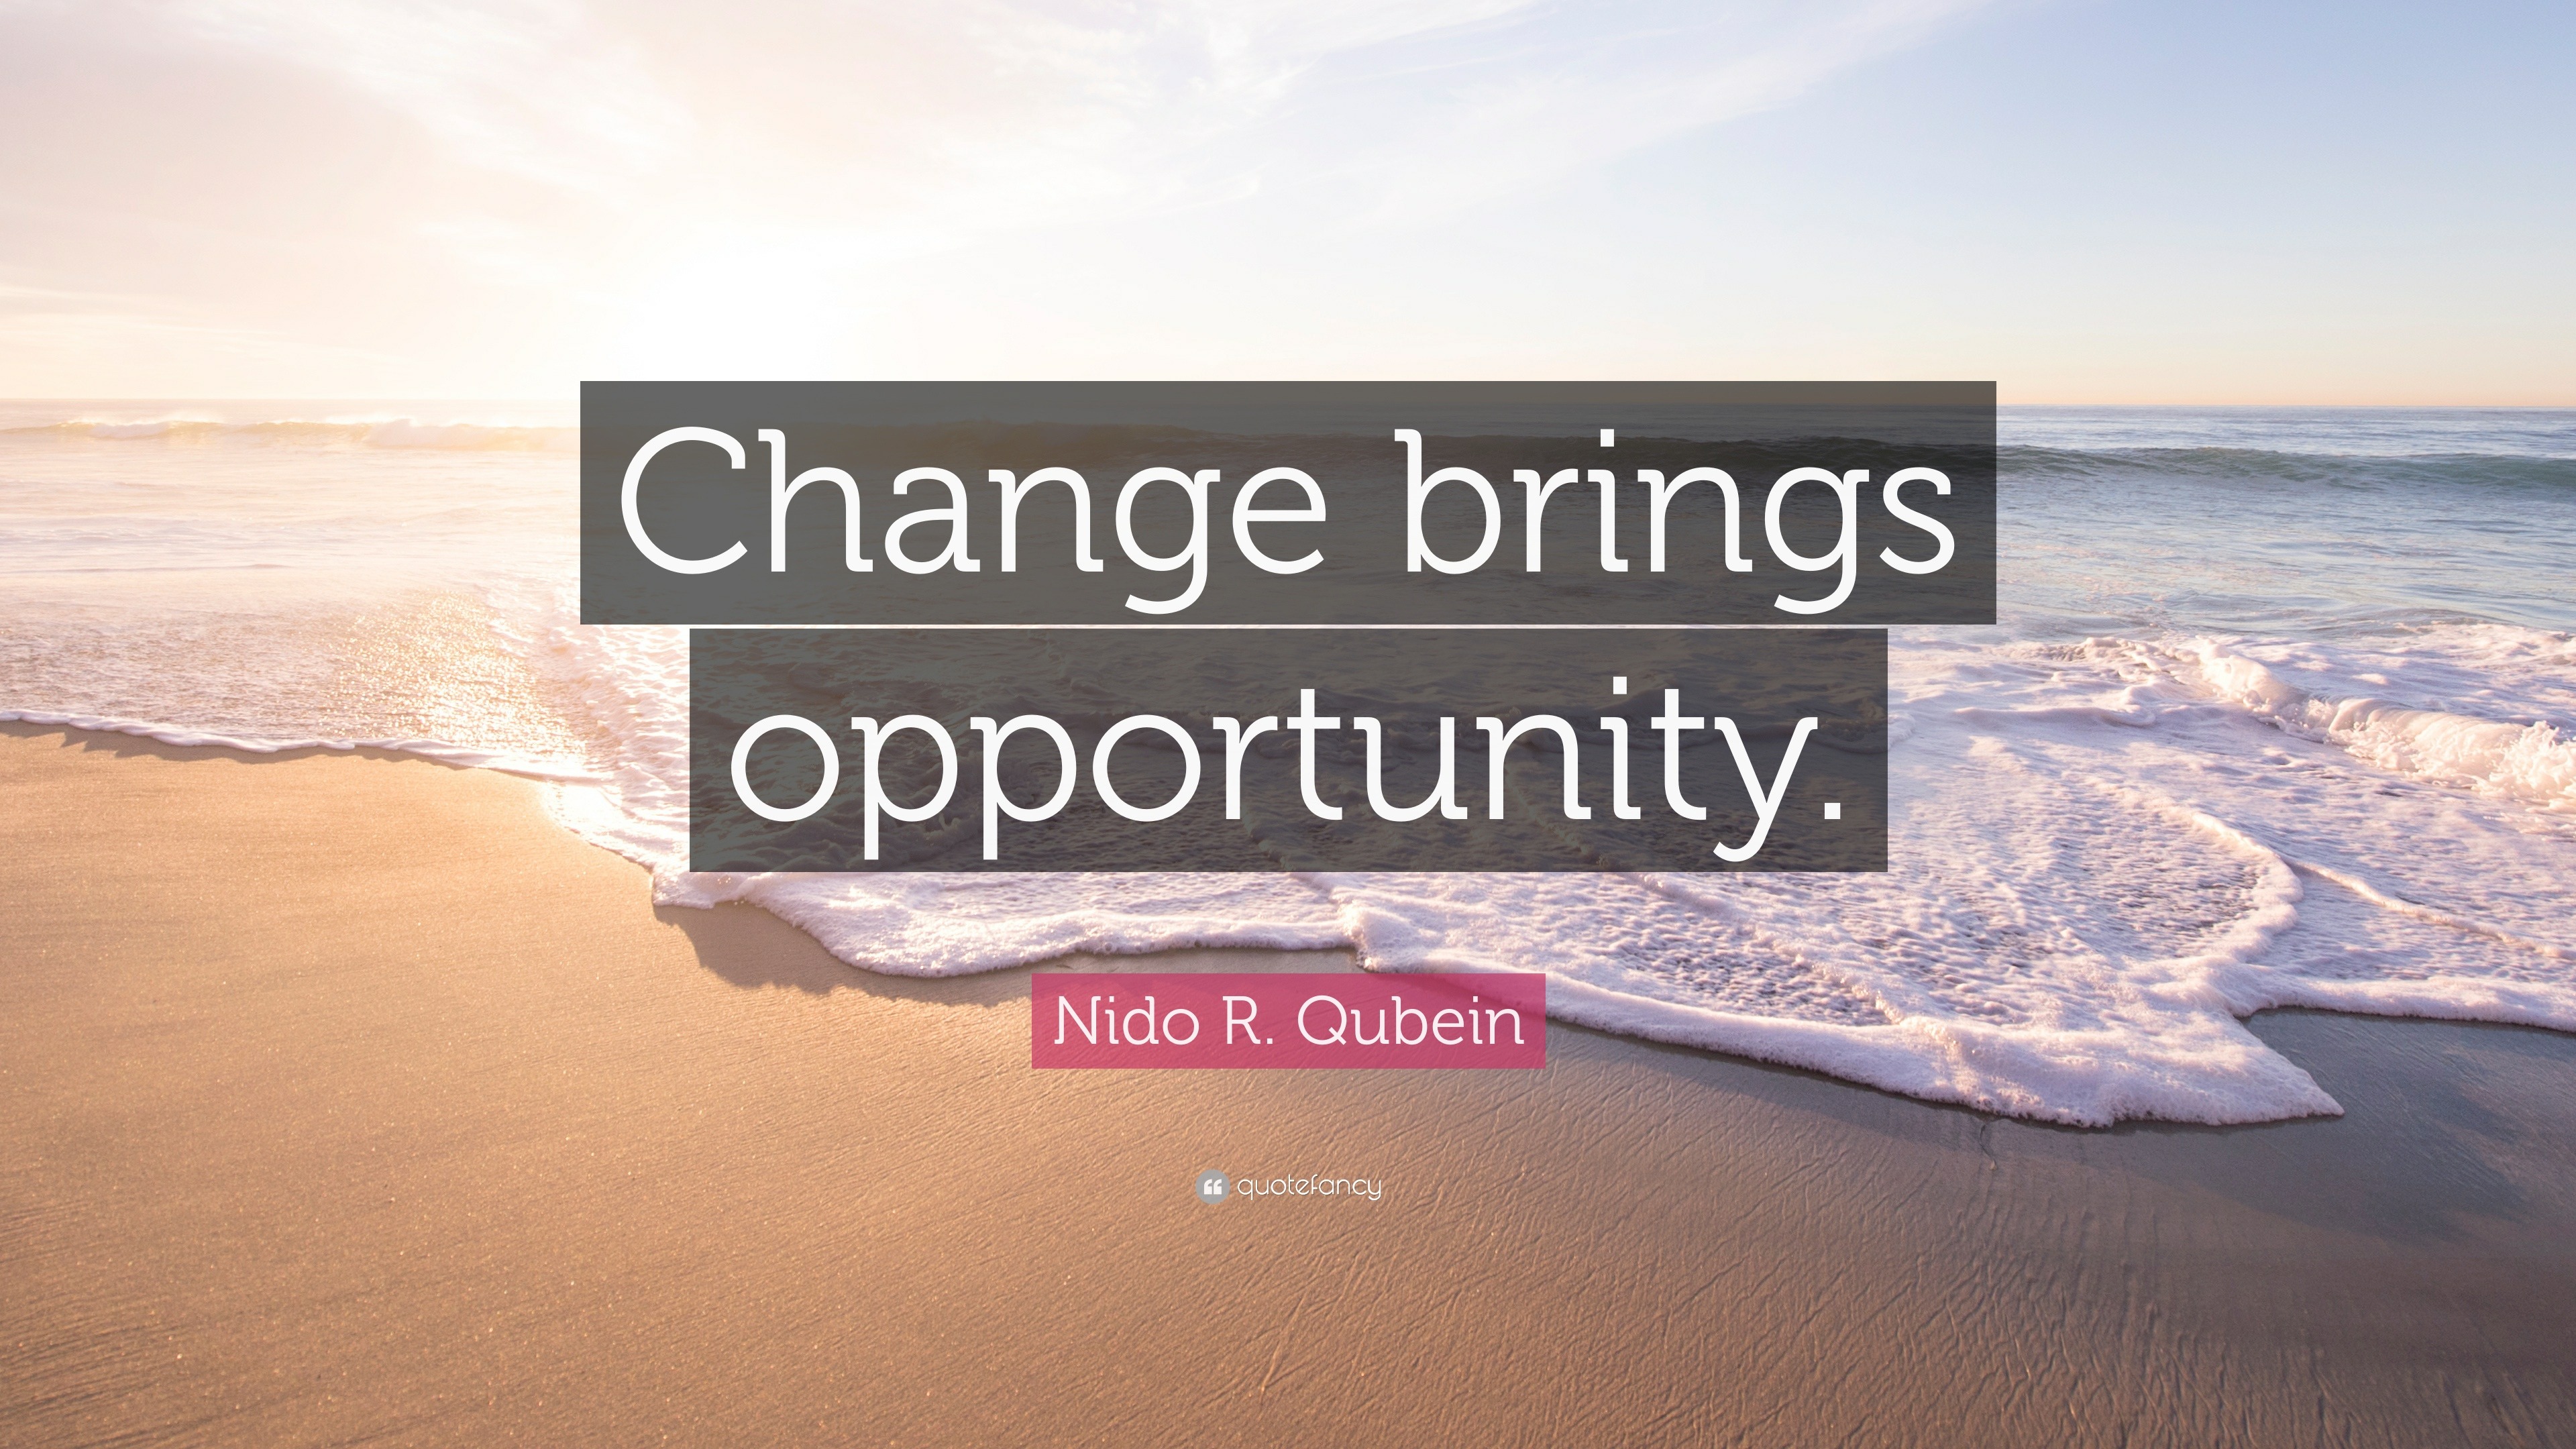 Nido R. Qubein Quote: “Change brings opportunity.”